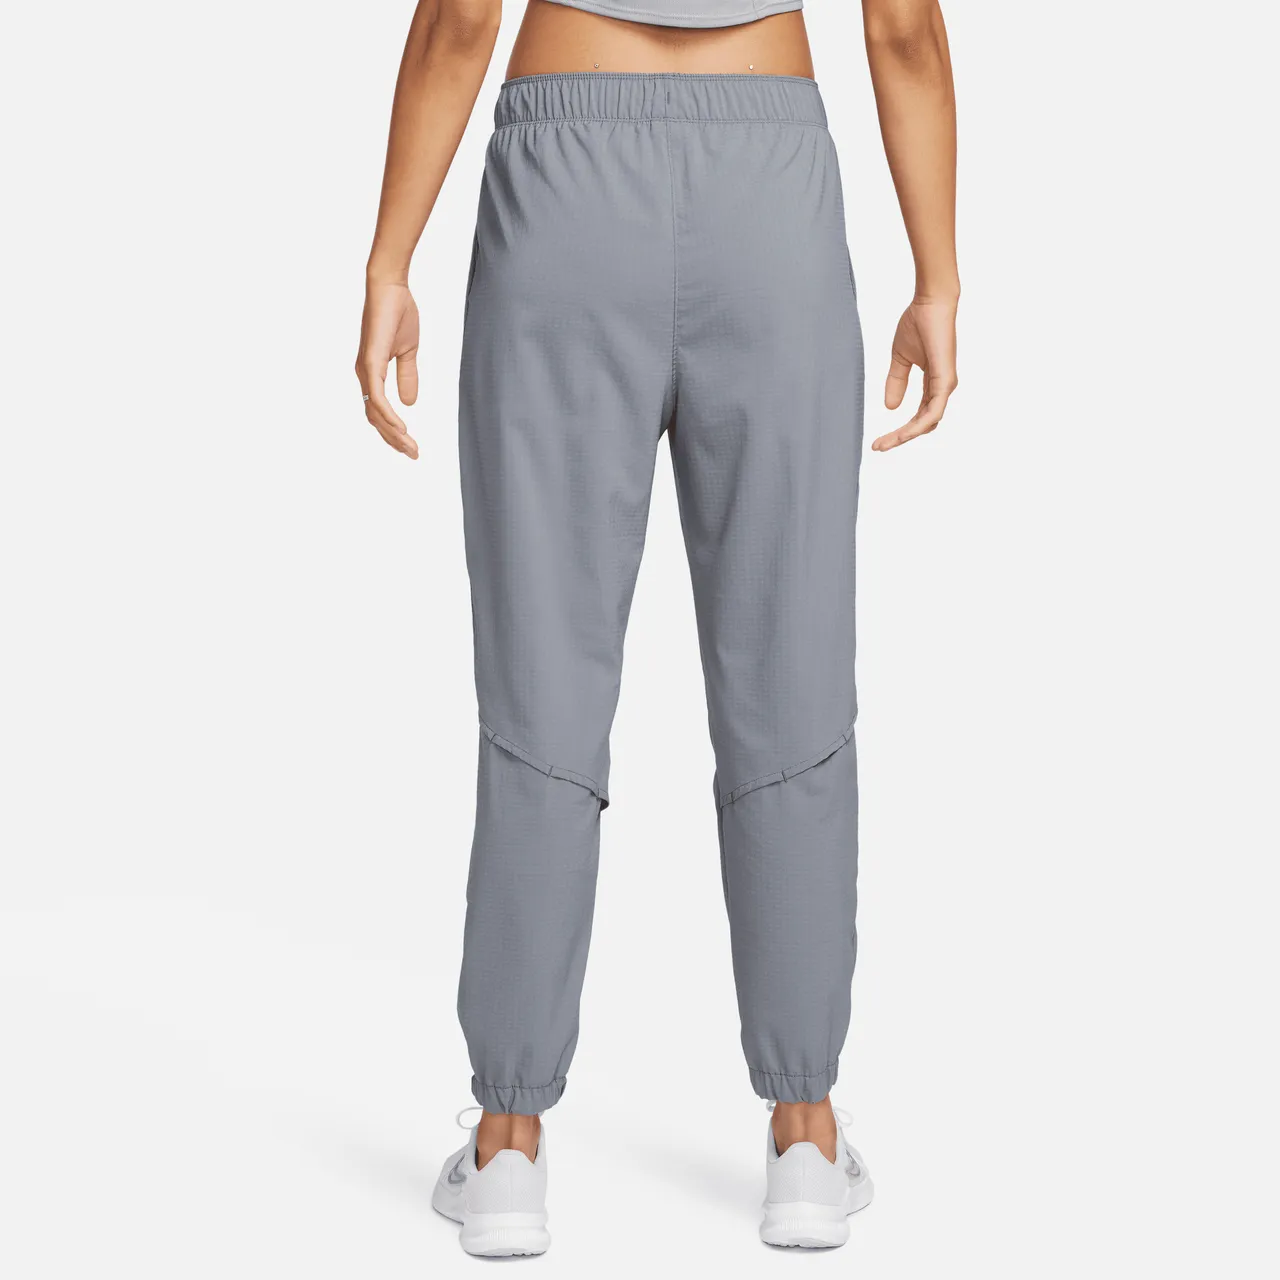 Nike Dri-FIT Fast Women's Mid-Rise 7/8 Warm-Up Running Trousers - Grey - Polyester